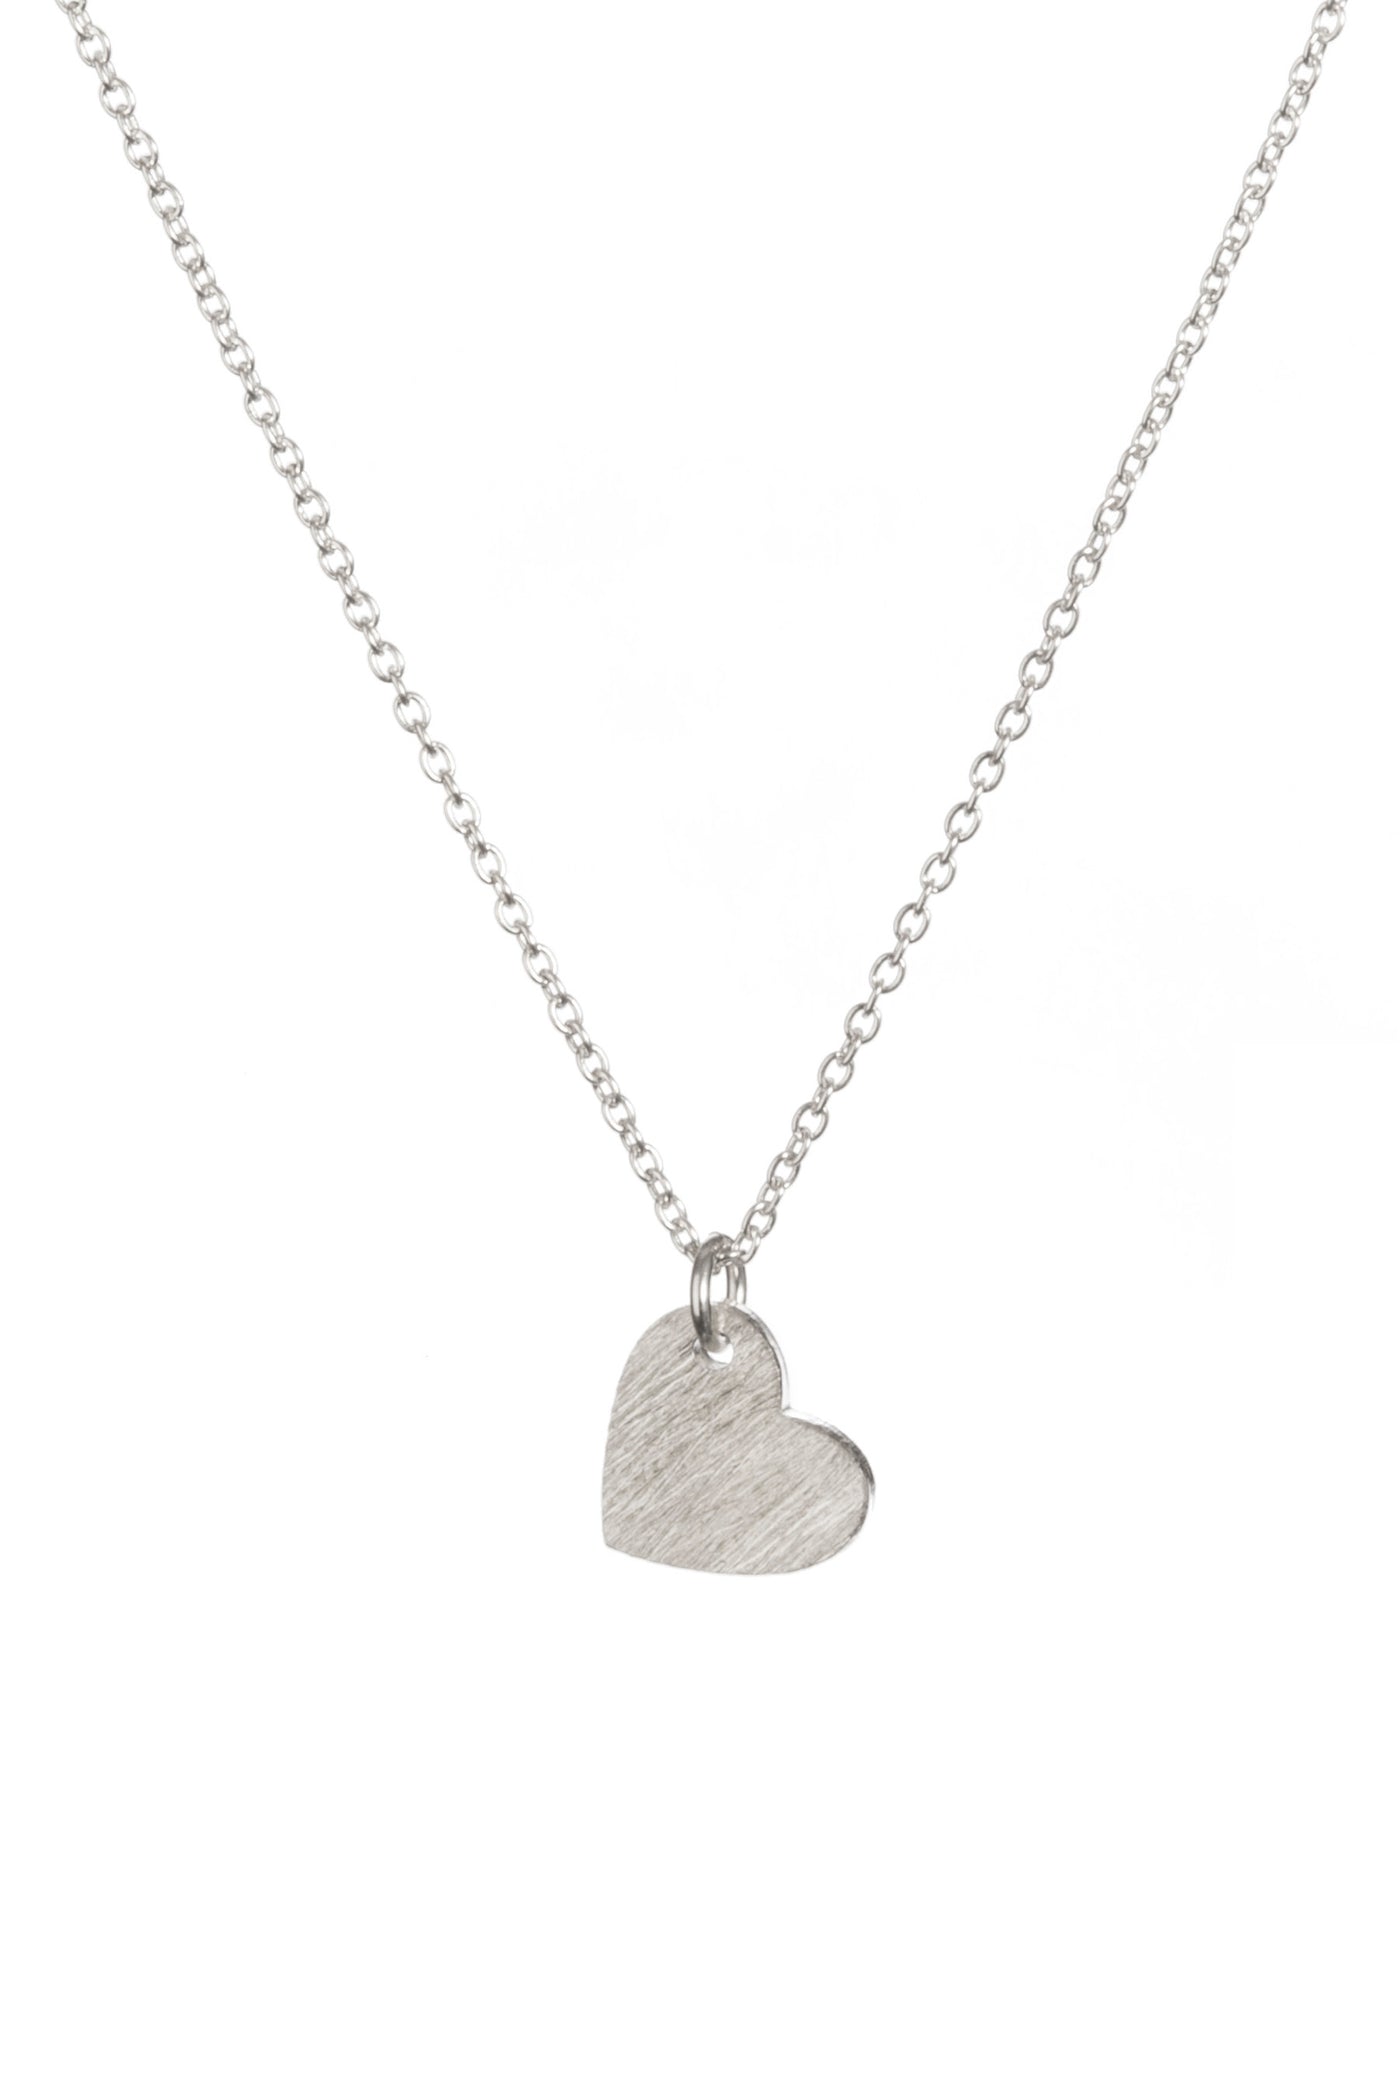 heartbeat necklace for fiance